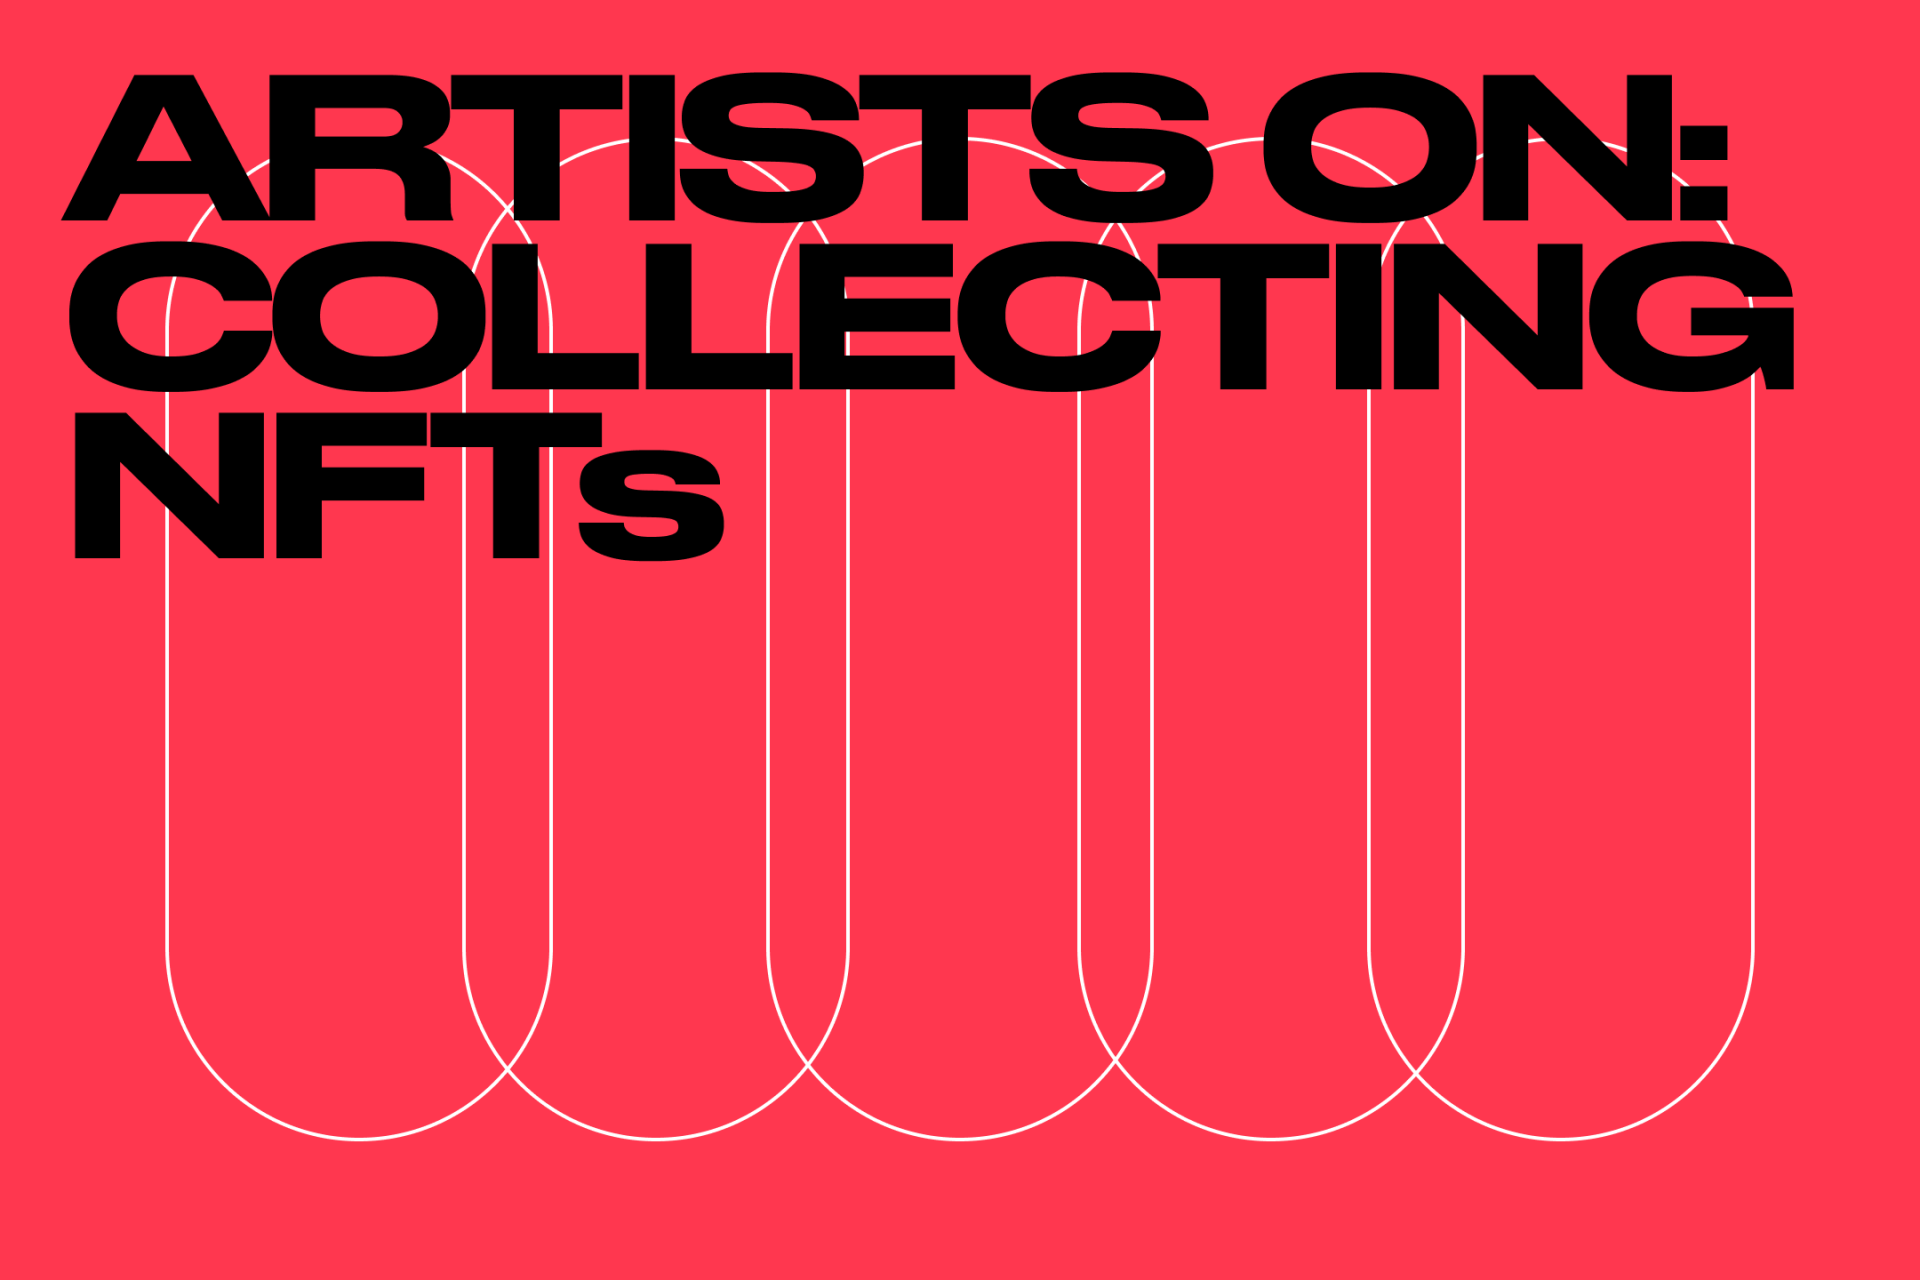 Why artists are collecting each other’s NFTs. | Foundation